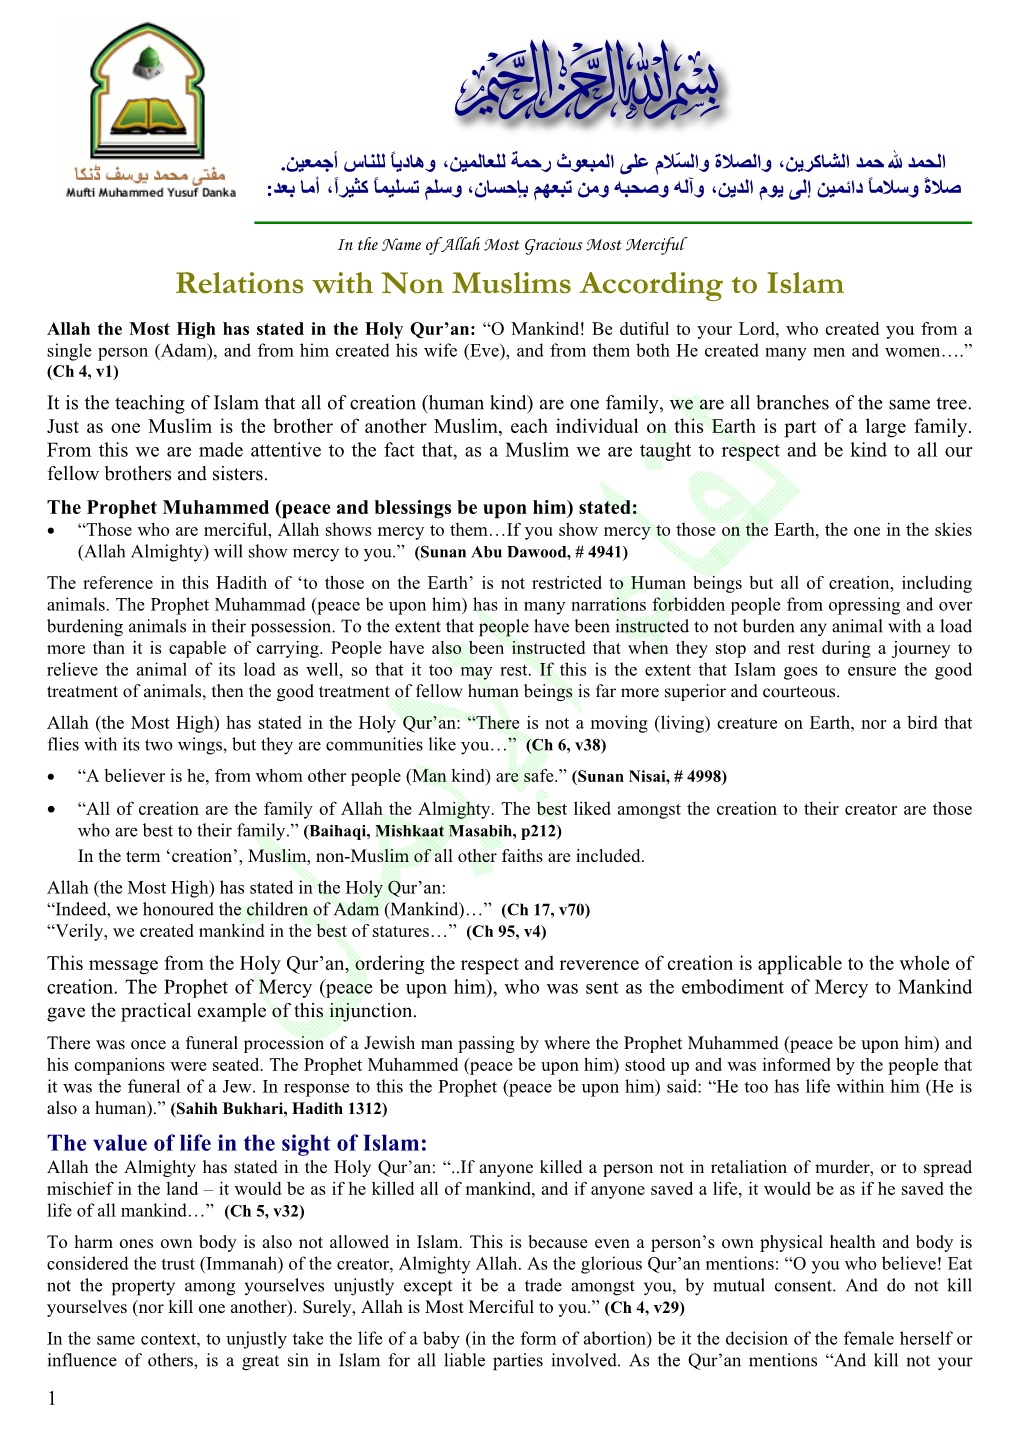 Relations with Non Muslims According to Islam